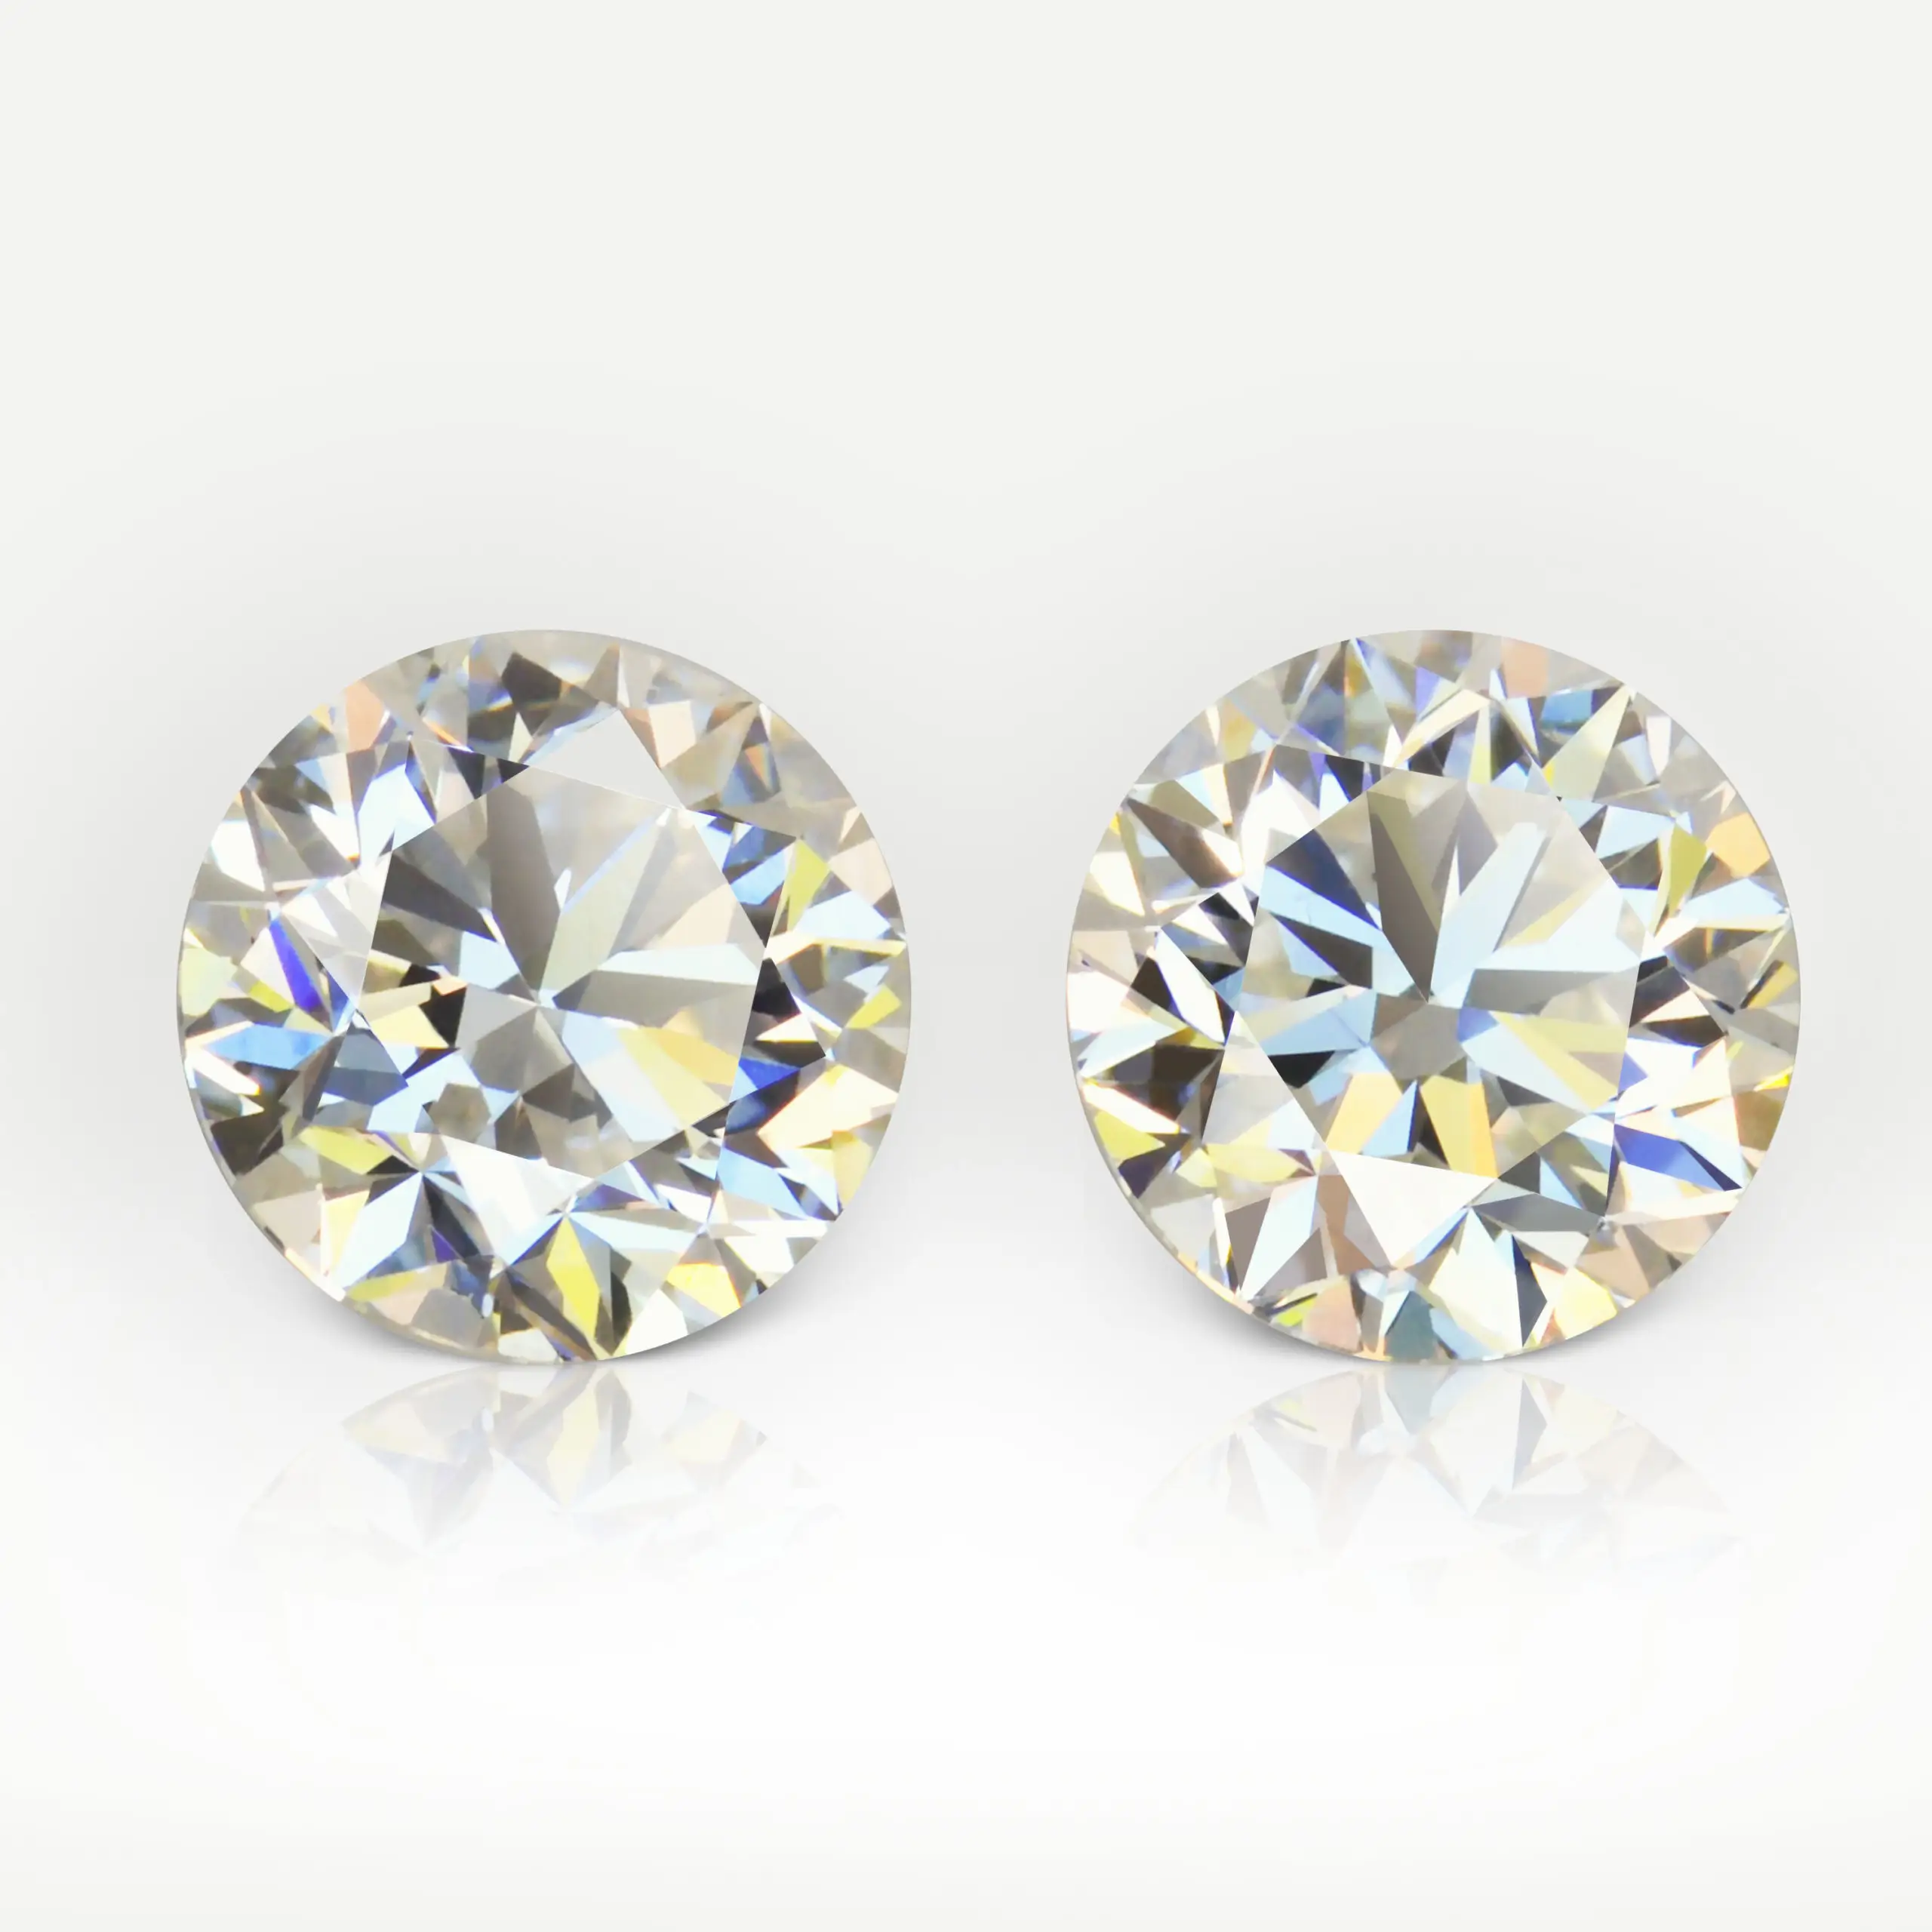 1.04 and 1.01 carat Pair of H VS2 Round Shape Diamonds GIA - picture 1